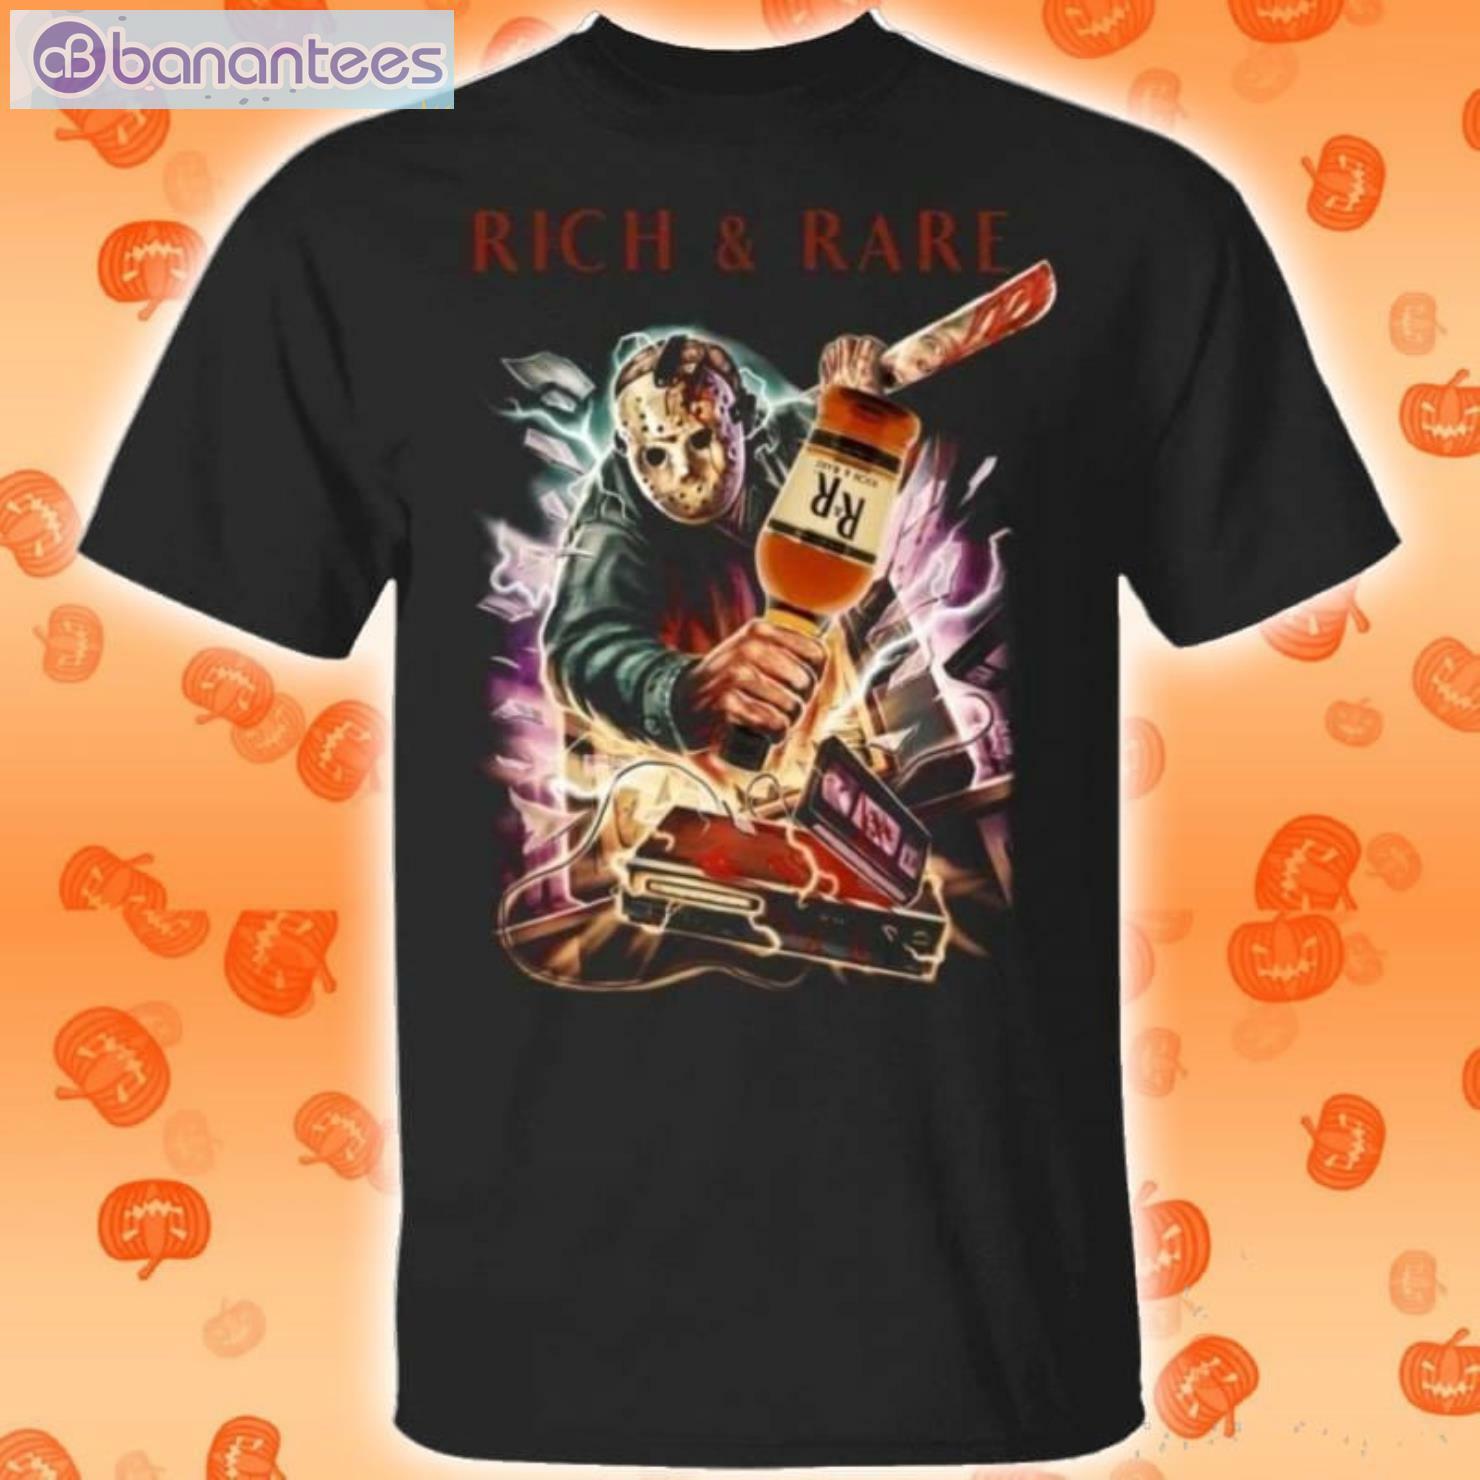 Jason Voorhees And Rich And Rare Whisky Halloween T-Shirt Product Photo 1